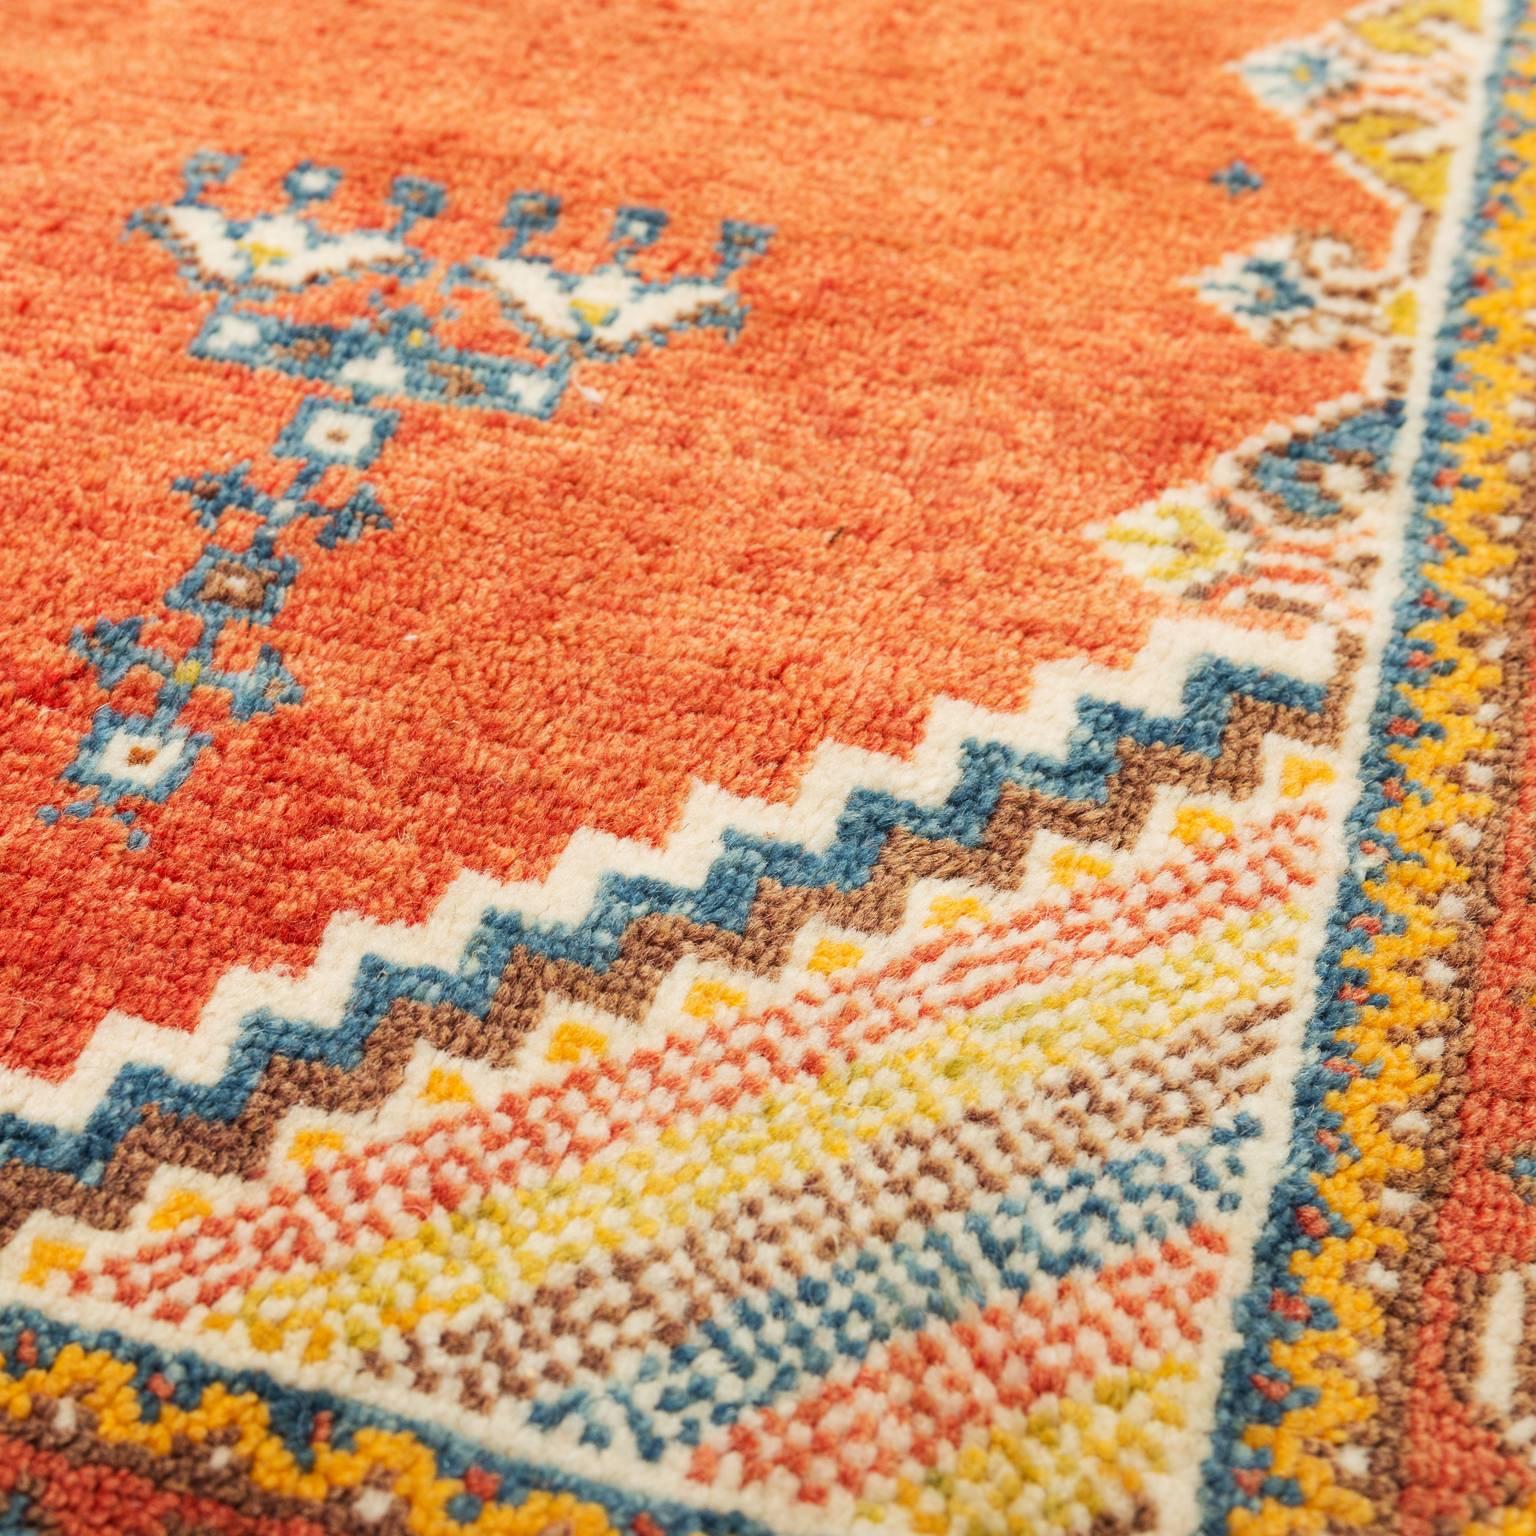 A handwoven wool Moroccan tribal rug from the 1950s in orange background with blue, cream and yellow accents. In excellent condition.